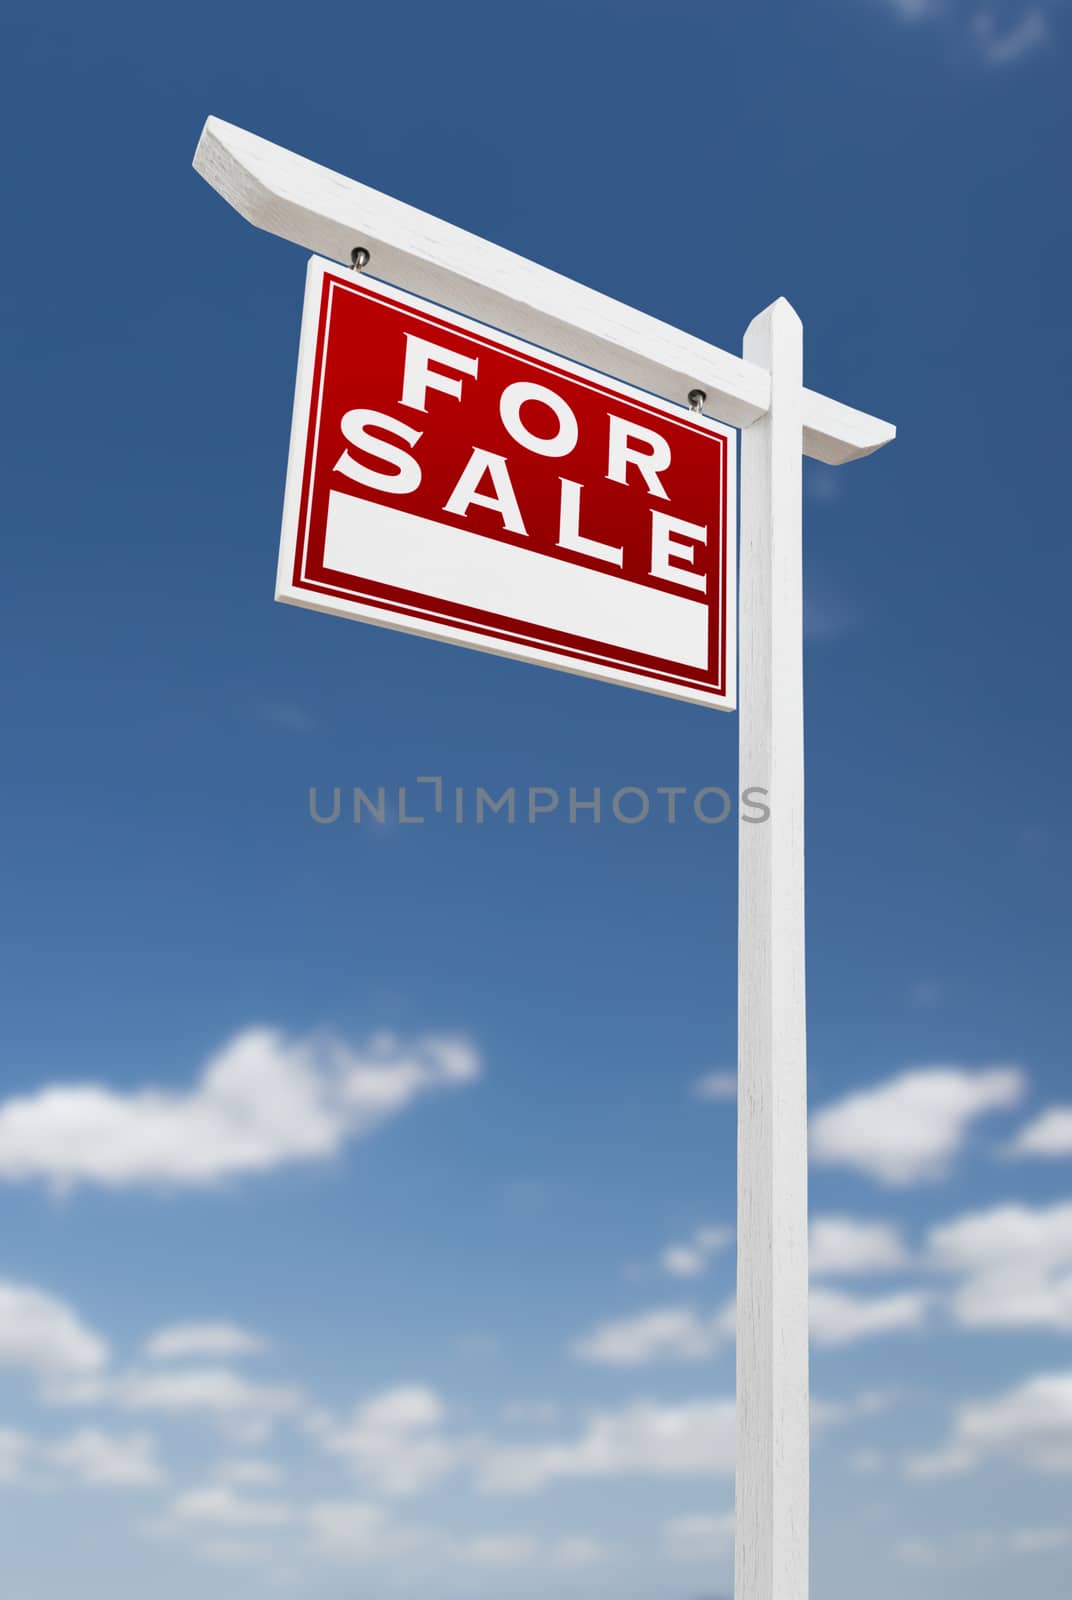 Left Facing For Sale Real Estate Sign on a Blue Sky with Clouds.